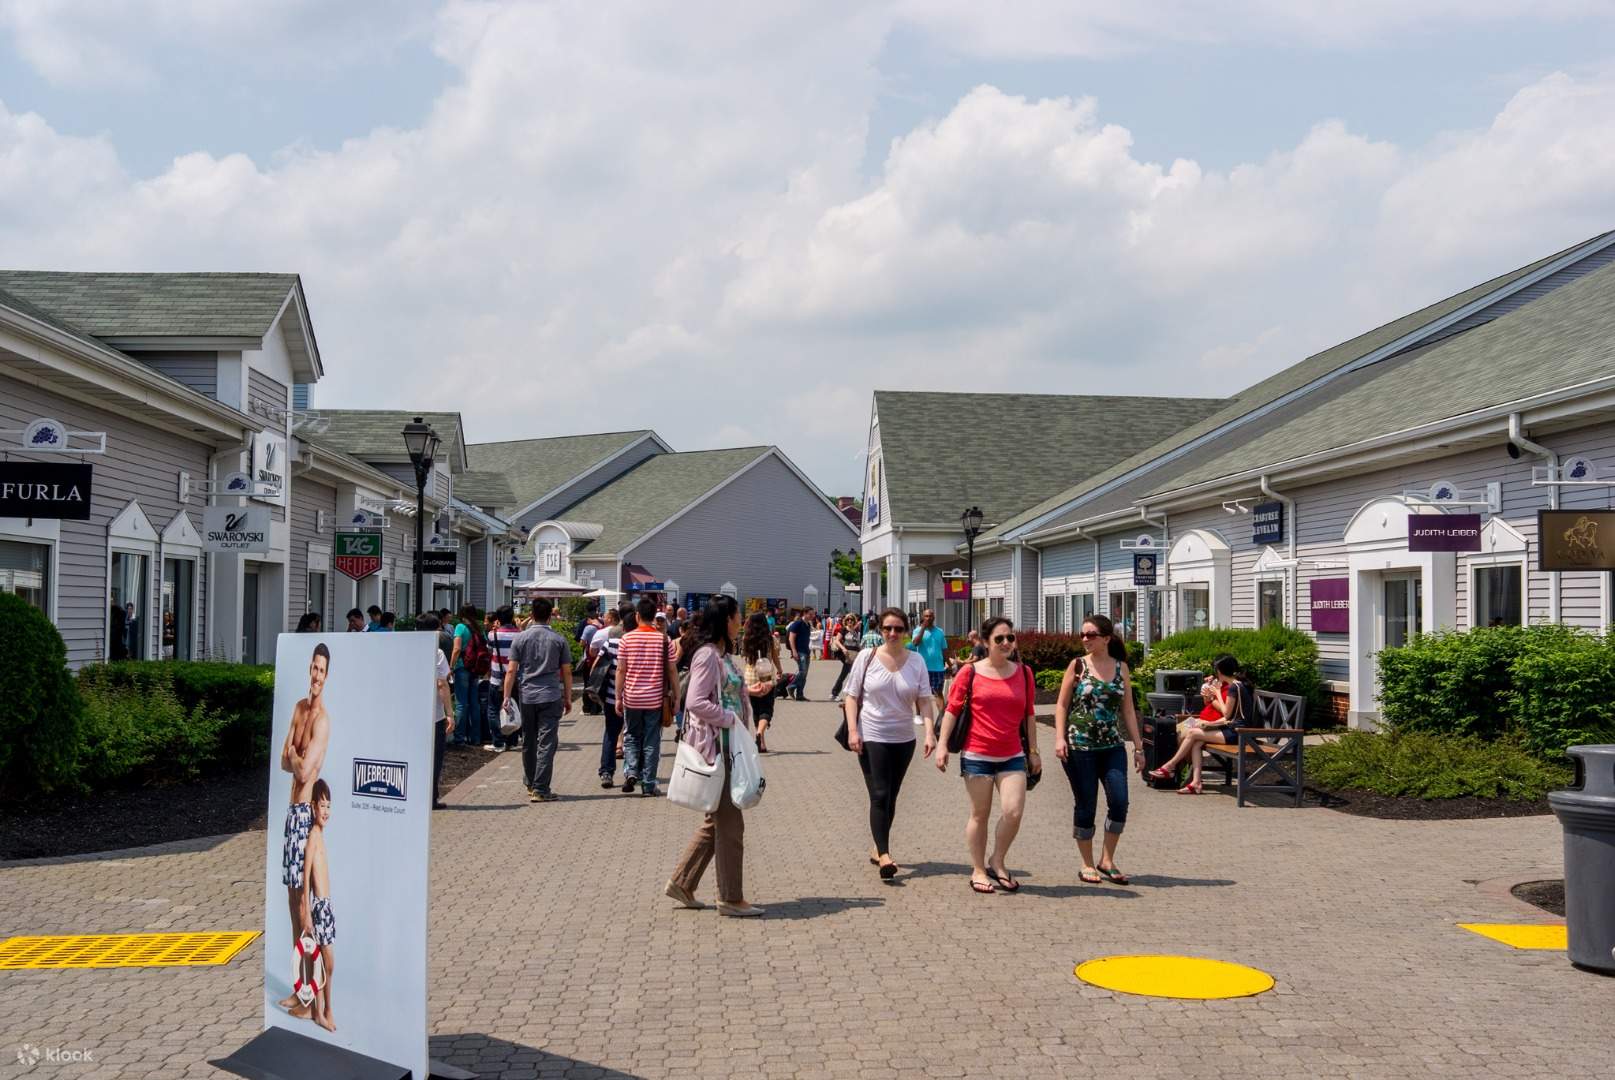 NYC: Woodbury Commons Outlet Mall Shopping Tour